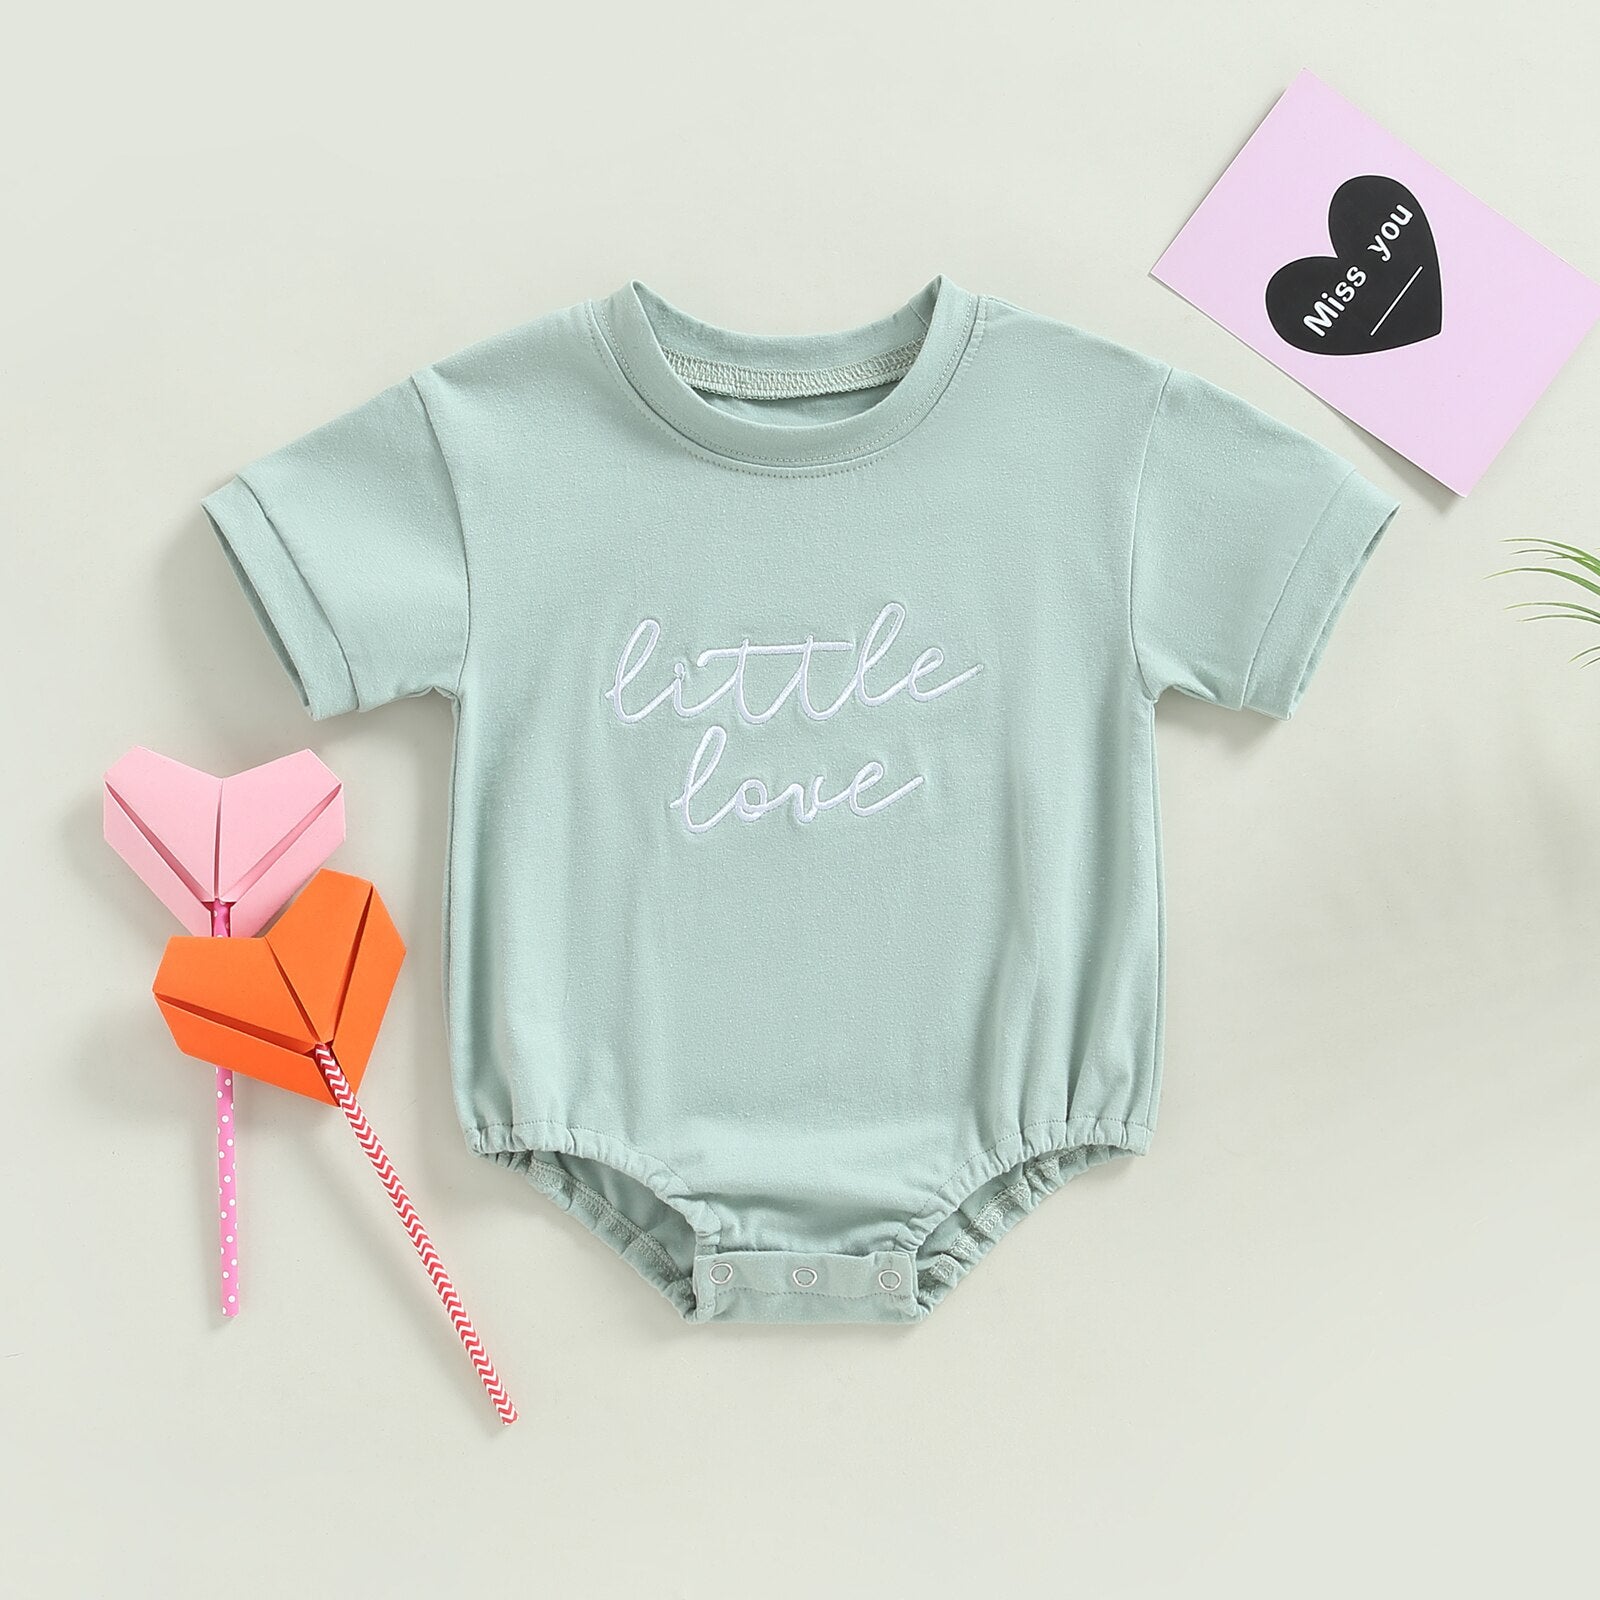 Adorable Baby Romper with Embroidered Letters